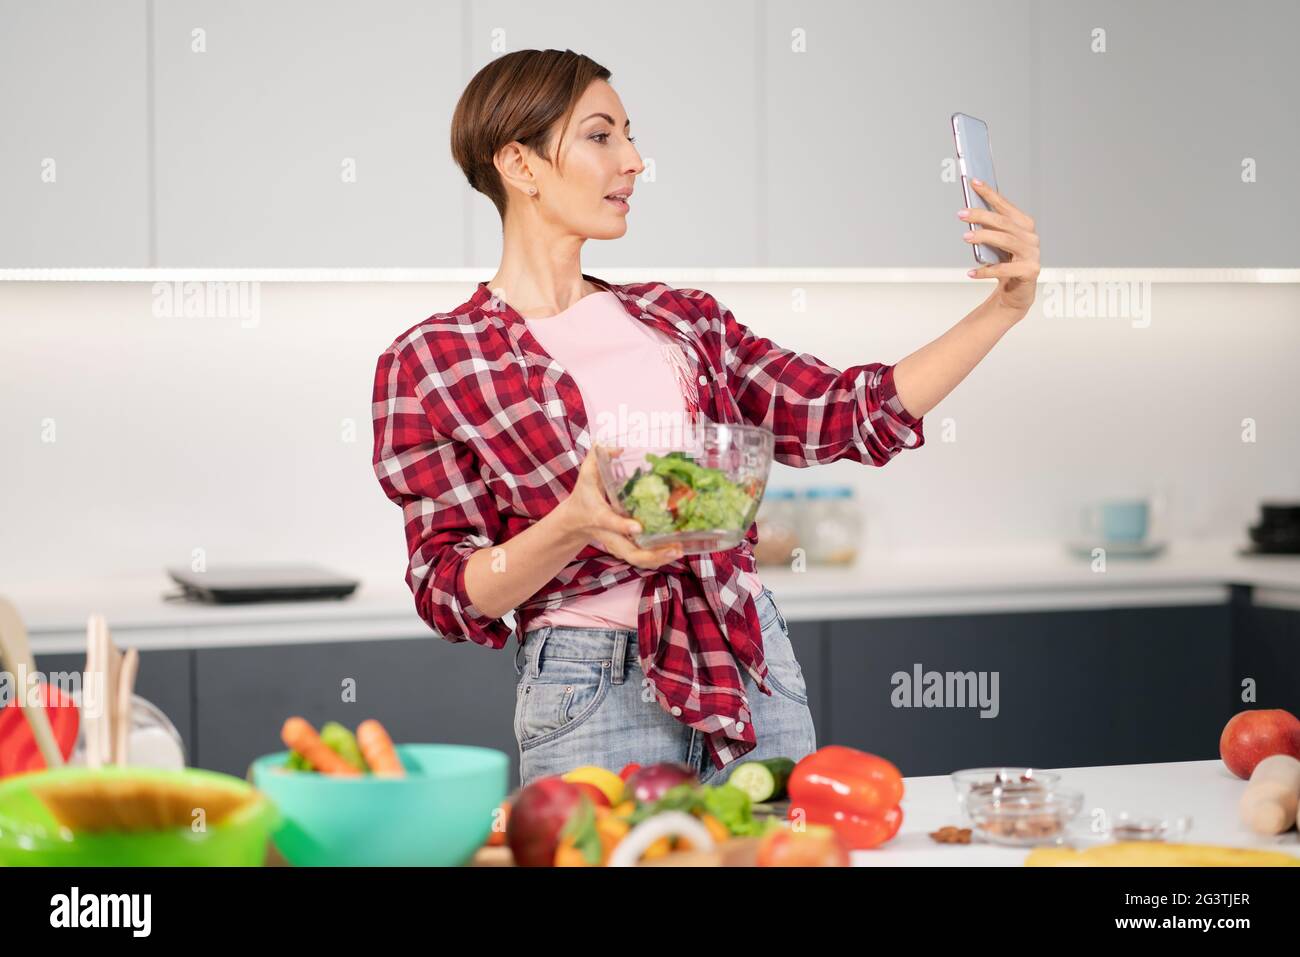 Pretty housewife taking selfie or making a video call using her smartphone while cooking fresh salad wearing a plaid shirt with Stock Photo